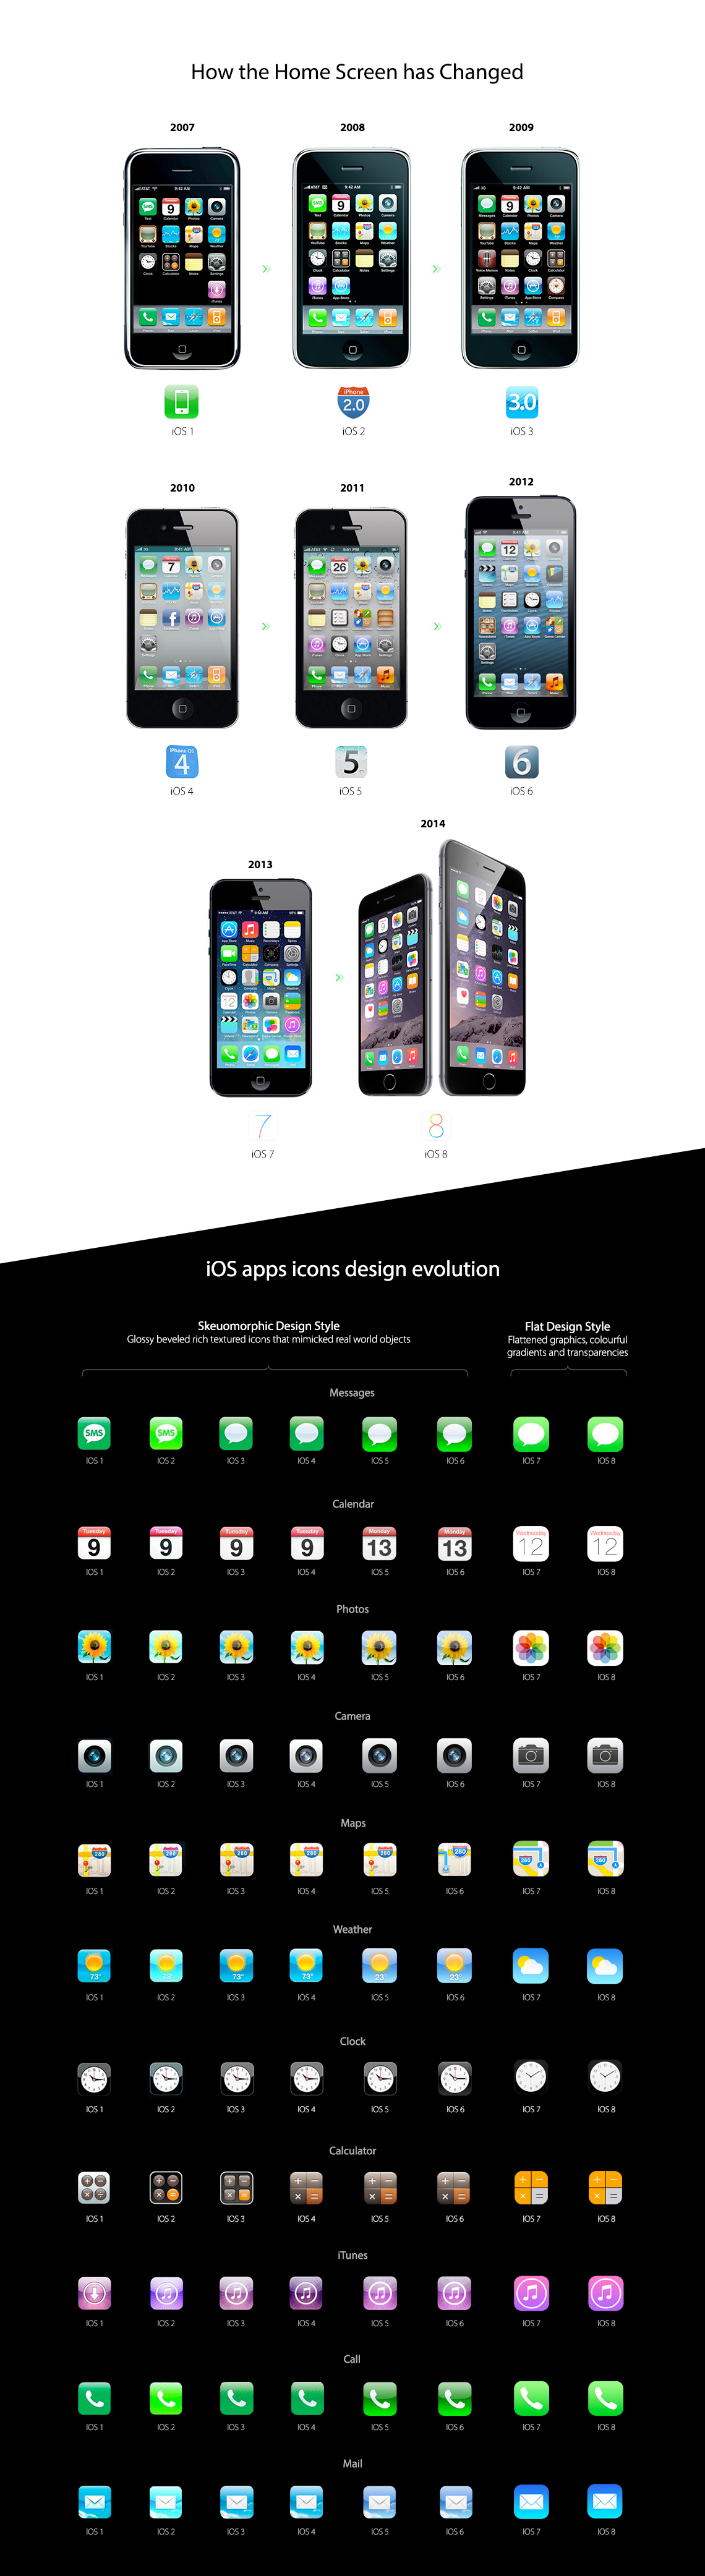 How iOS Has Changed